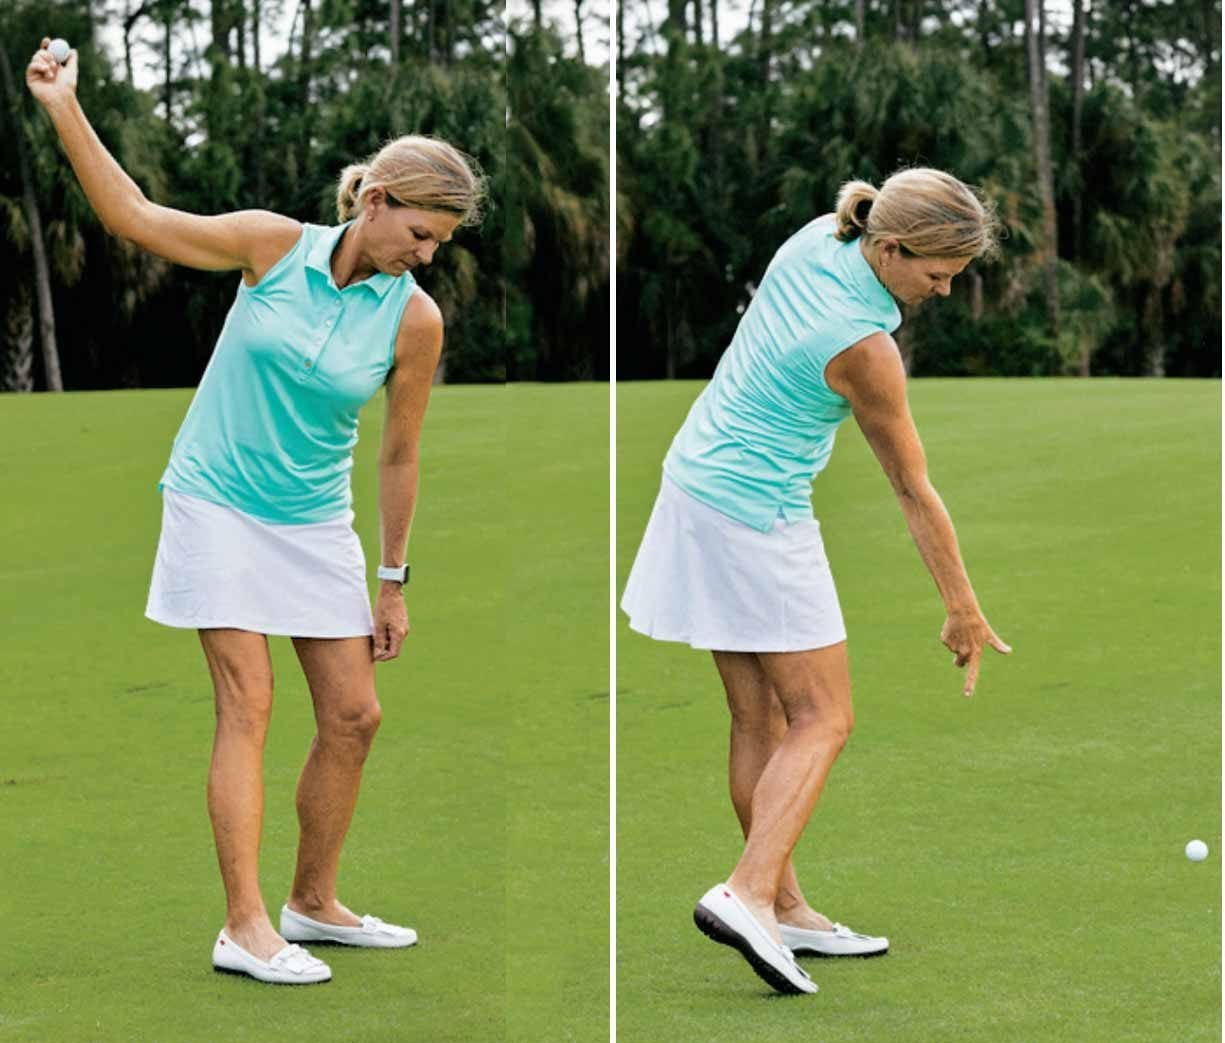 Women''s Golf Tips - How to Find the Best Women''s Golf Drive
